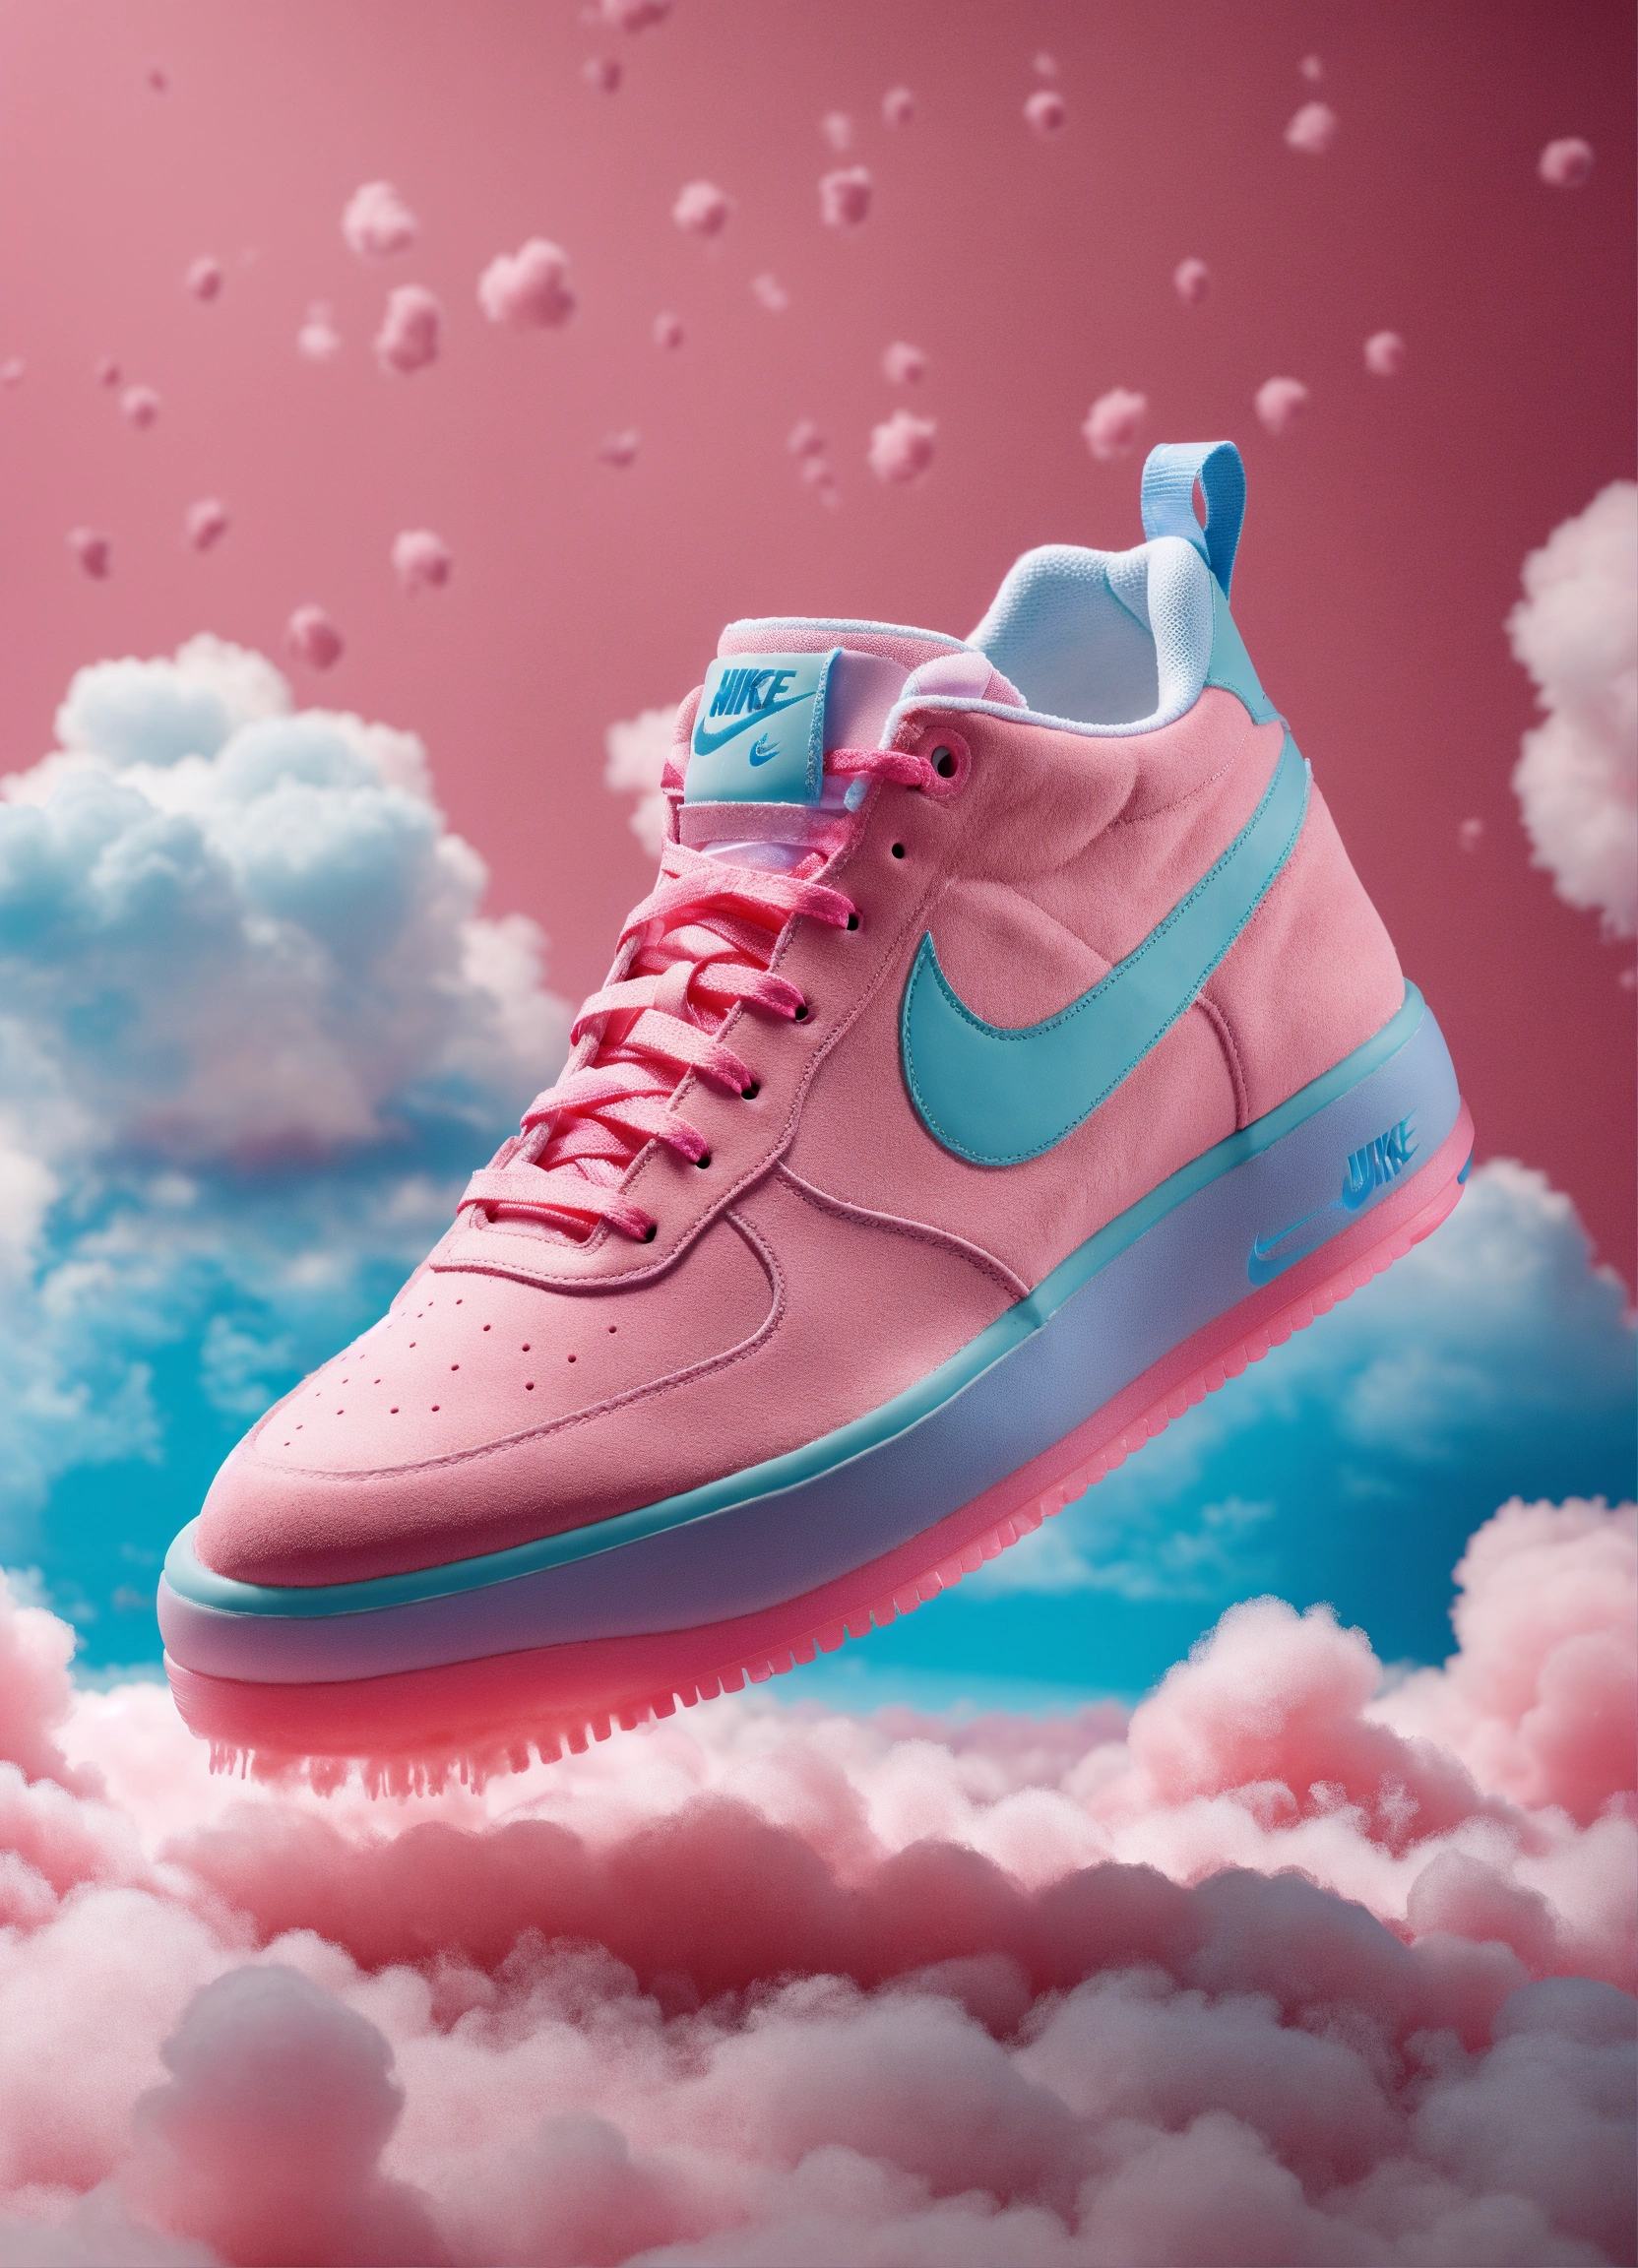 Lexica - Nike sneaker concept, made out of cotton candy clouds , luxury ...